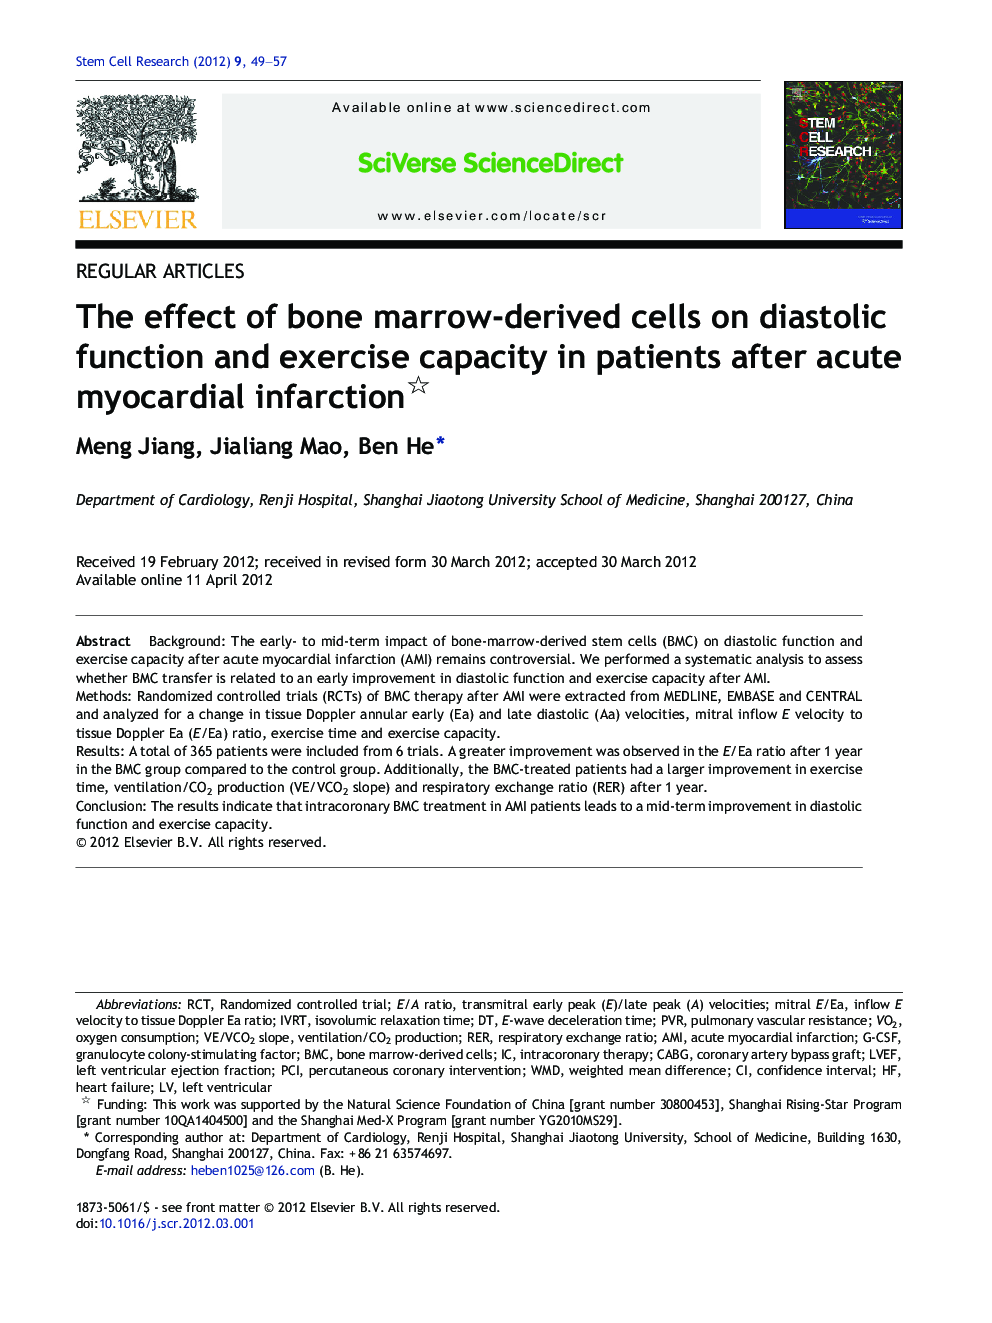 The effect of bone marrow-derived cells on diastolic function and exercise capacity in patients after acute myocardial infarction 